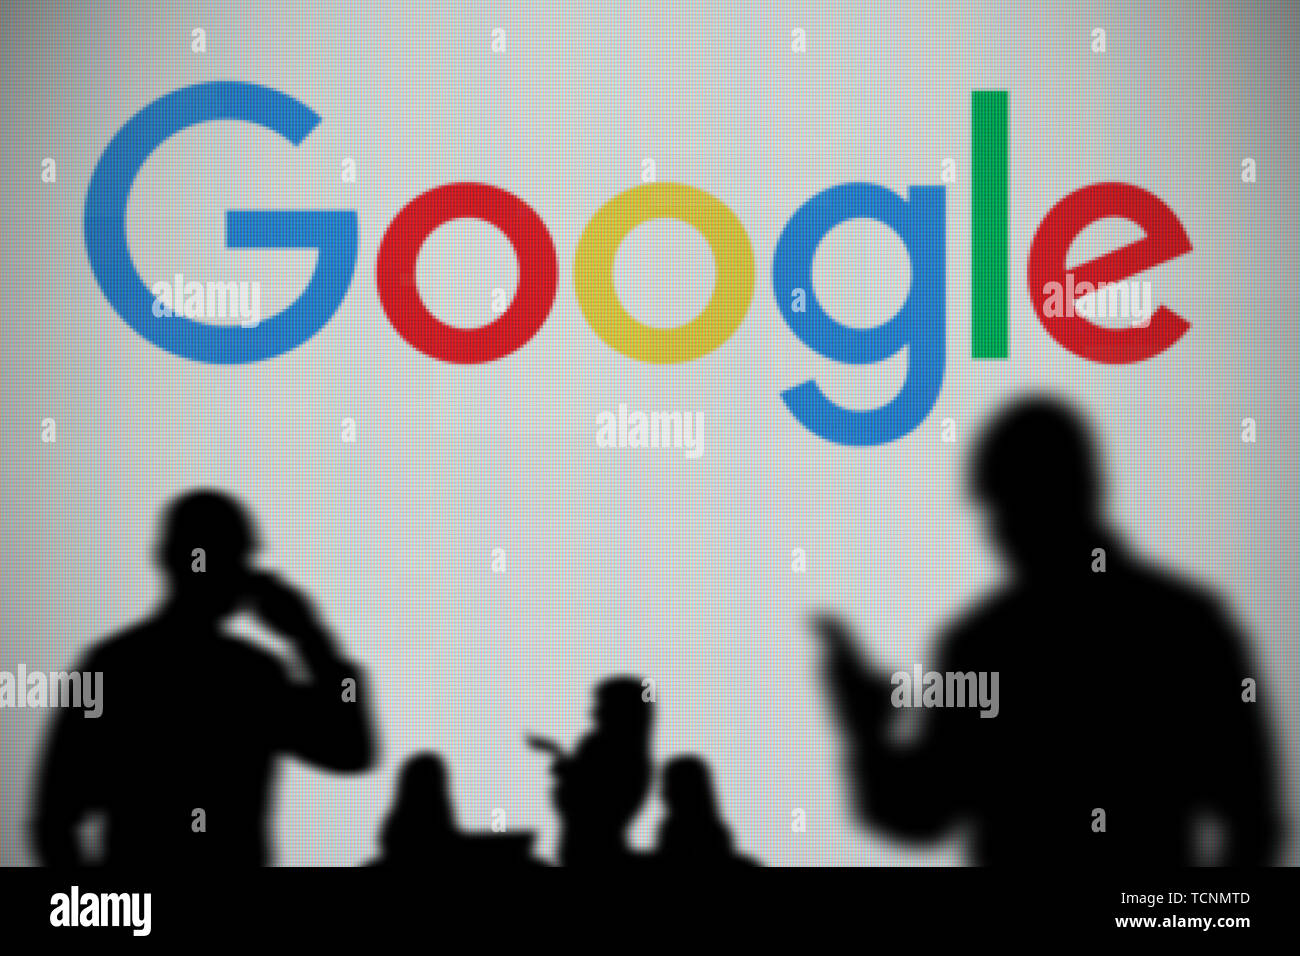 The Google logo is seen on an LED screen in the background while a silhouetted person uses a smartphone in the foreground (Editorial use only) Stock Photo